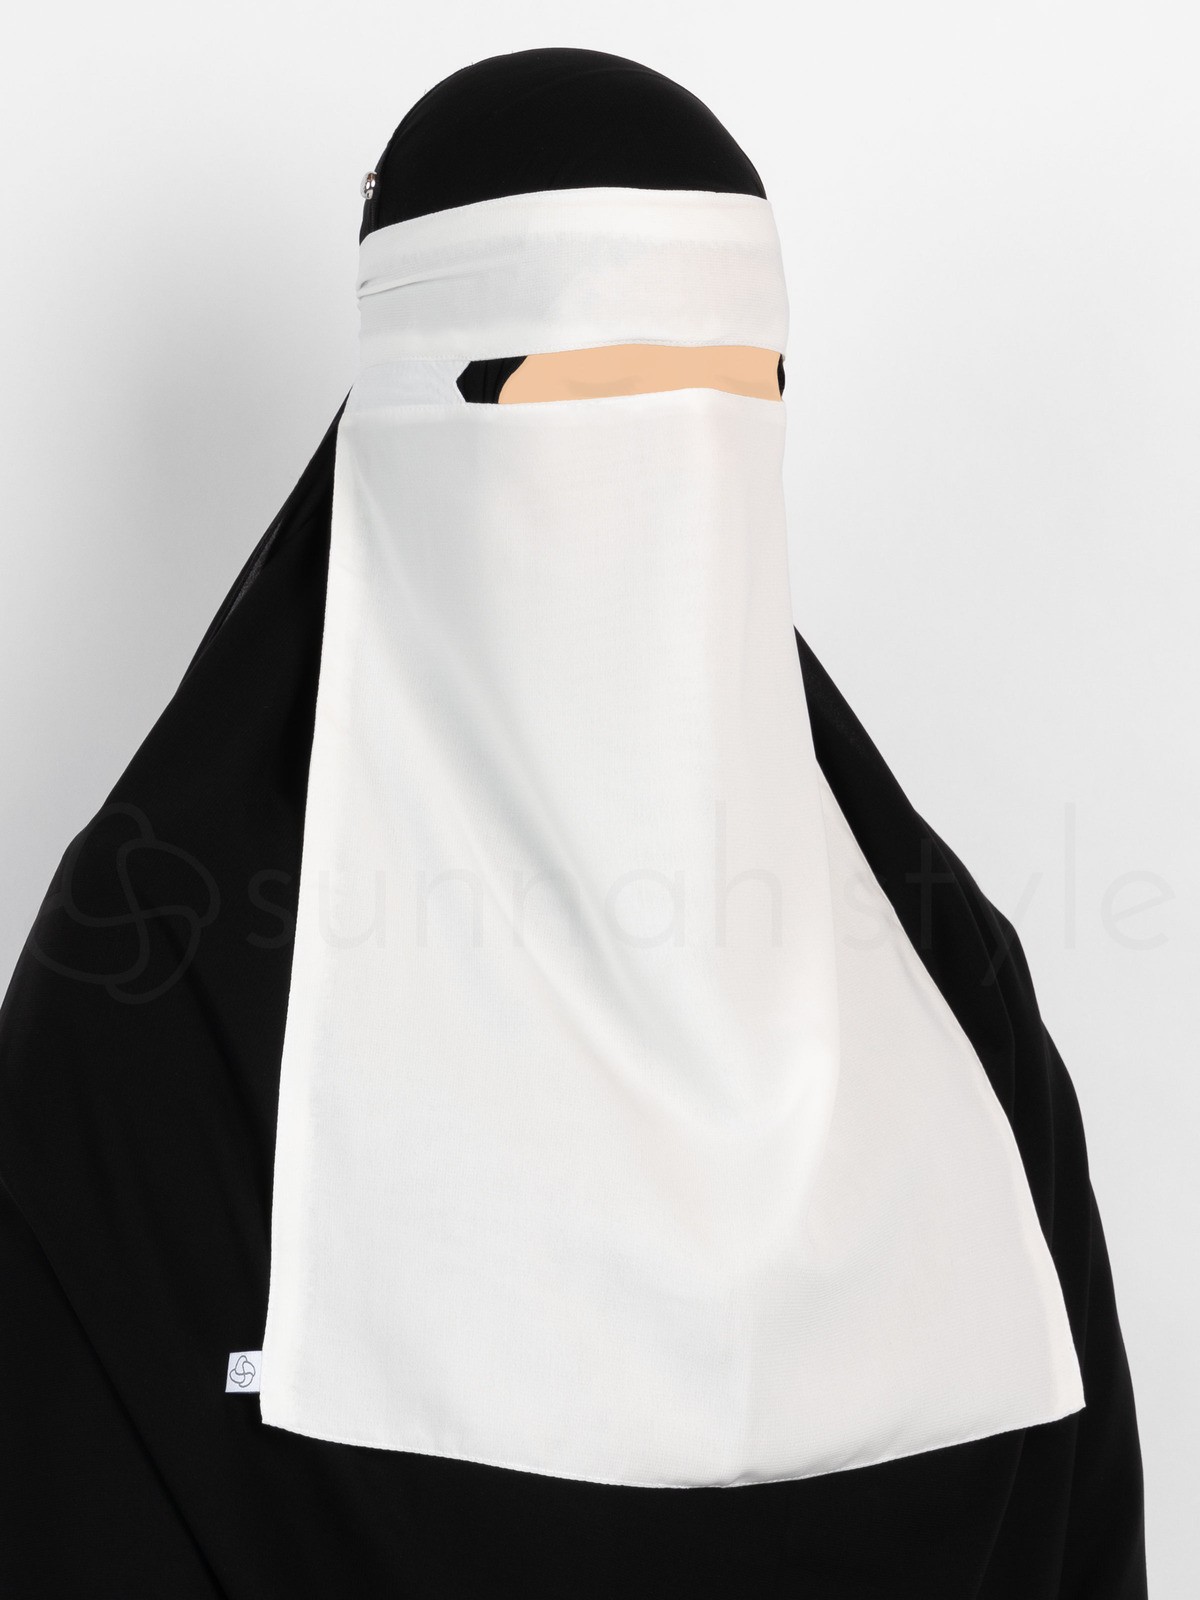 Sunnah Style - No-Pinch One Layer Niqab (White)